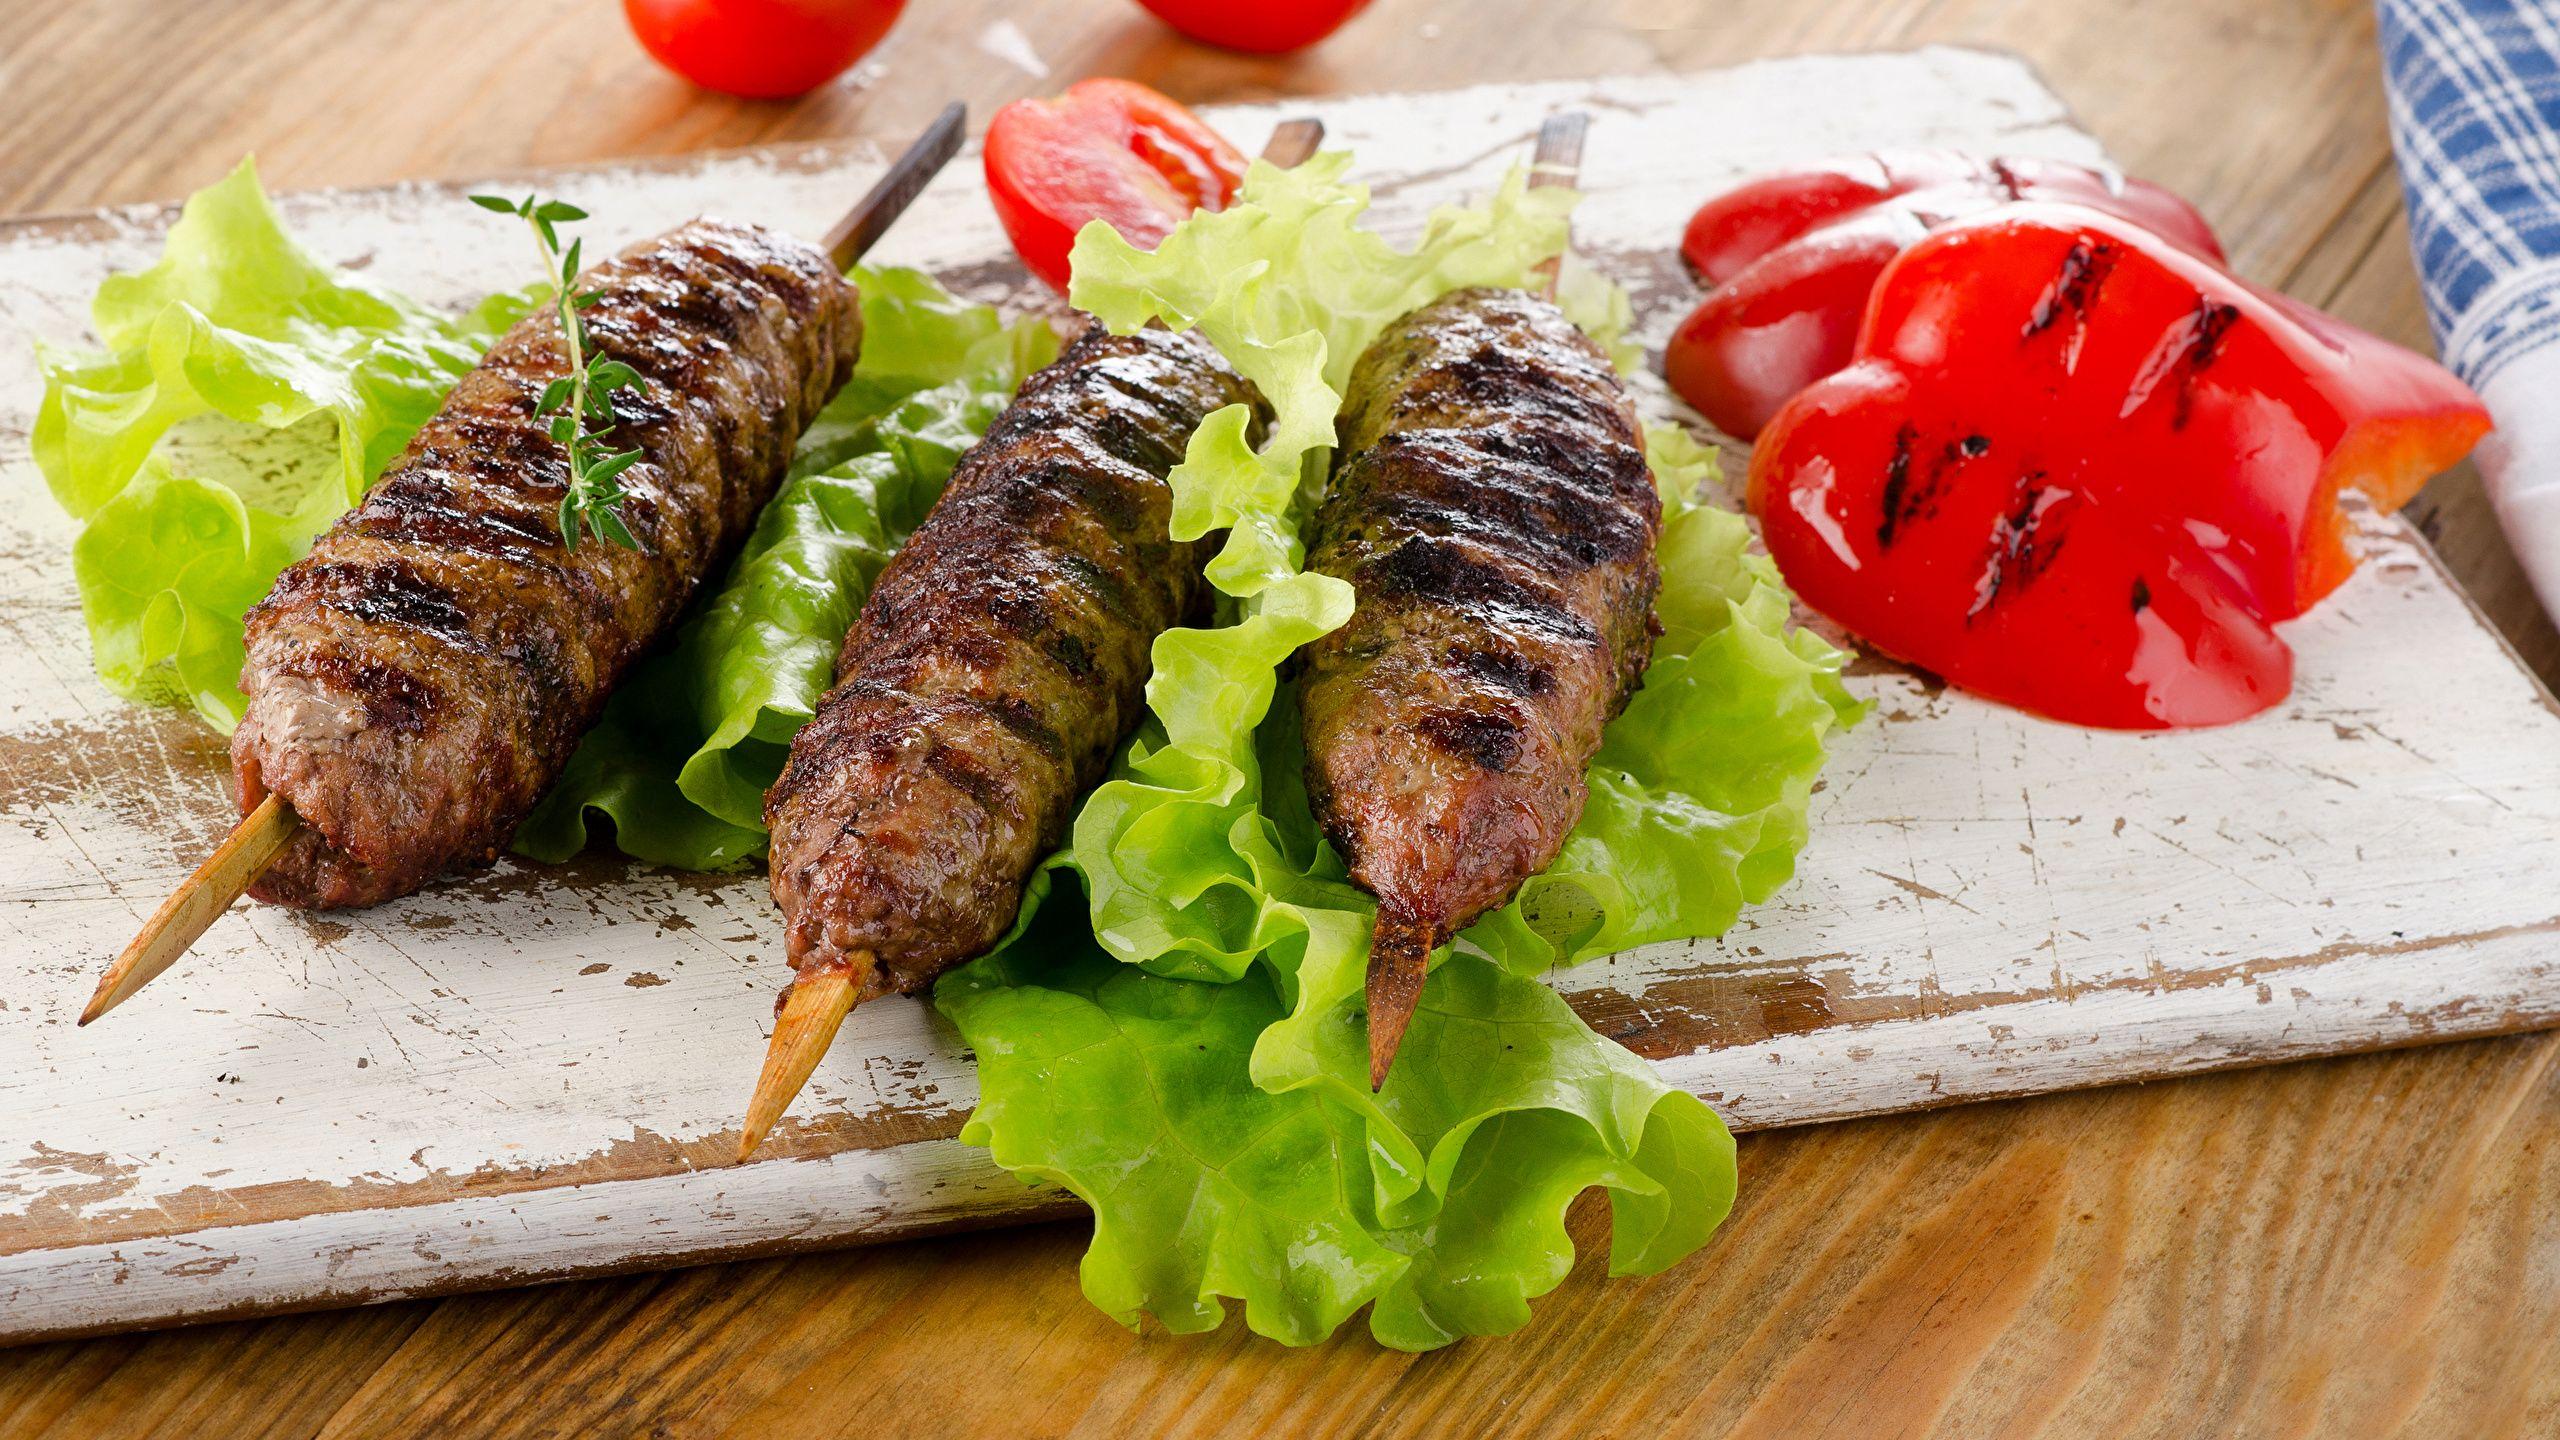 Wallpaper Kebab Tomatoes Food Meat products 2560x1440